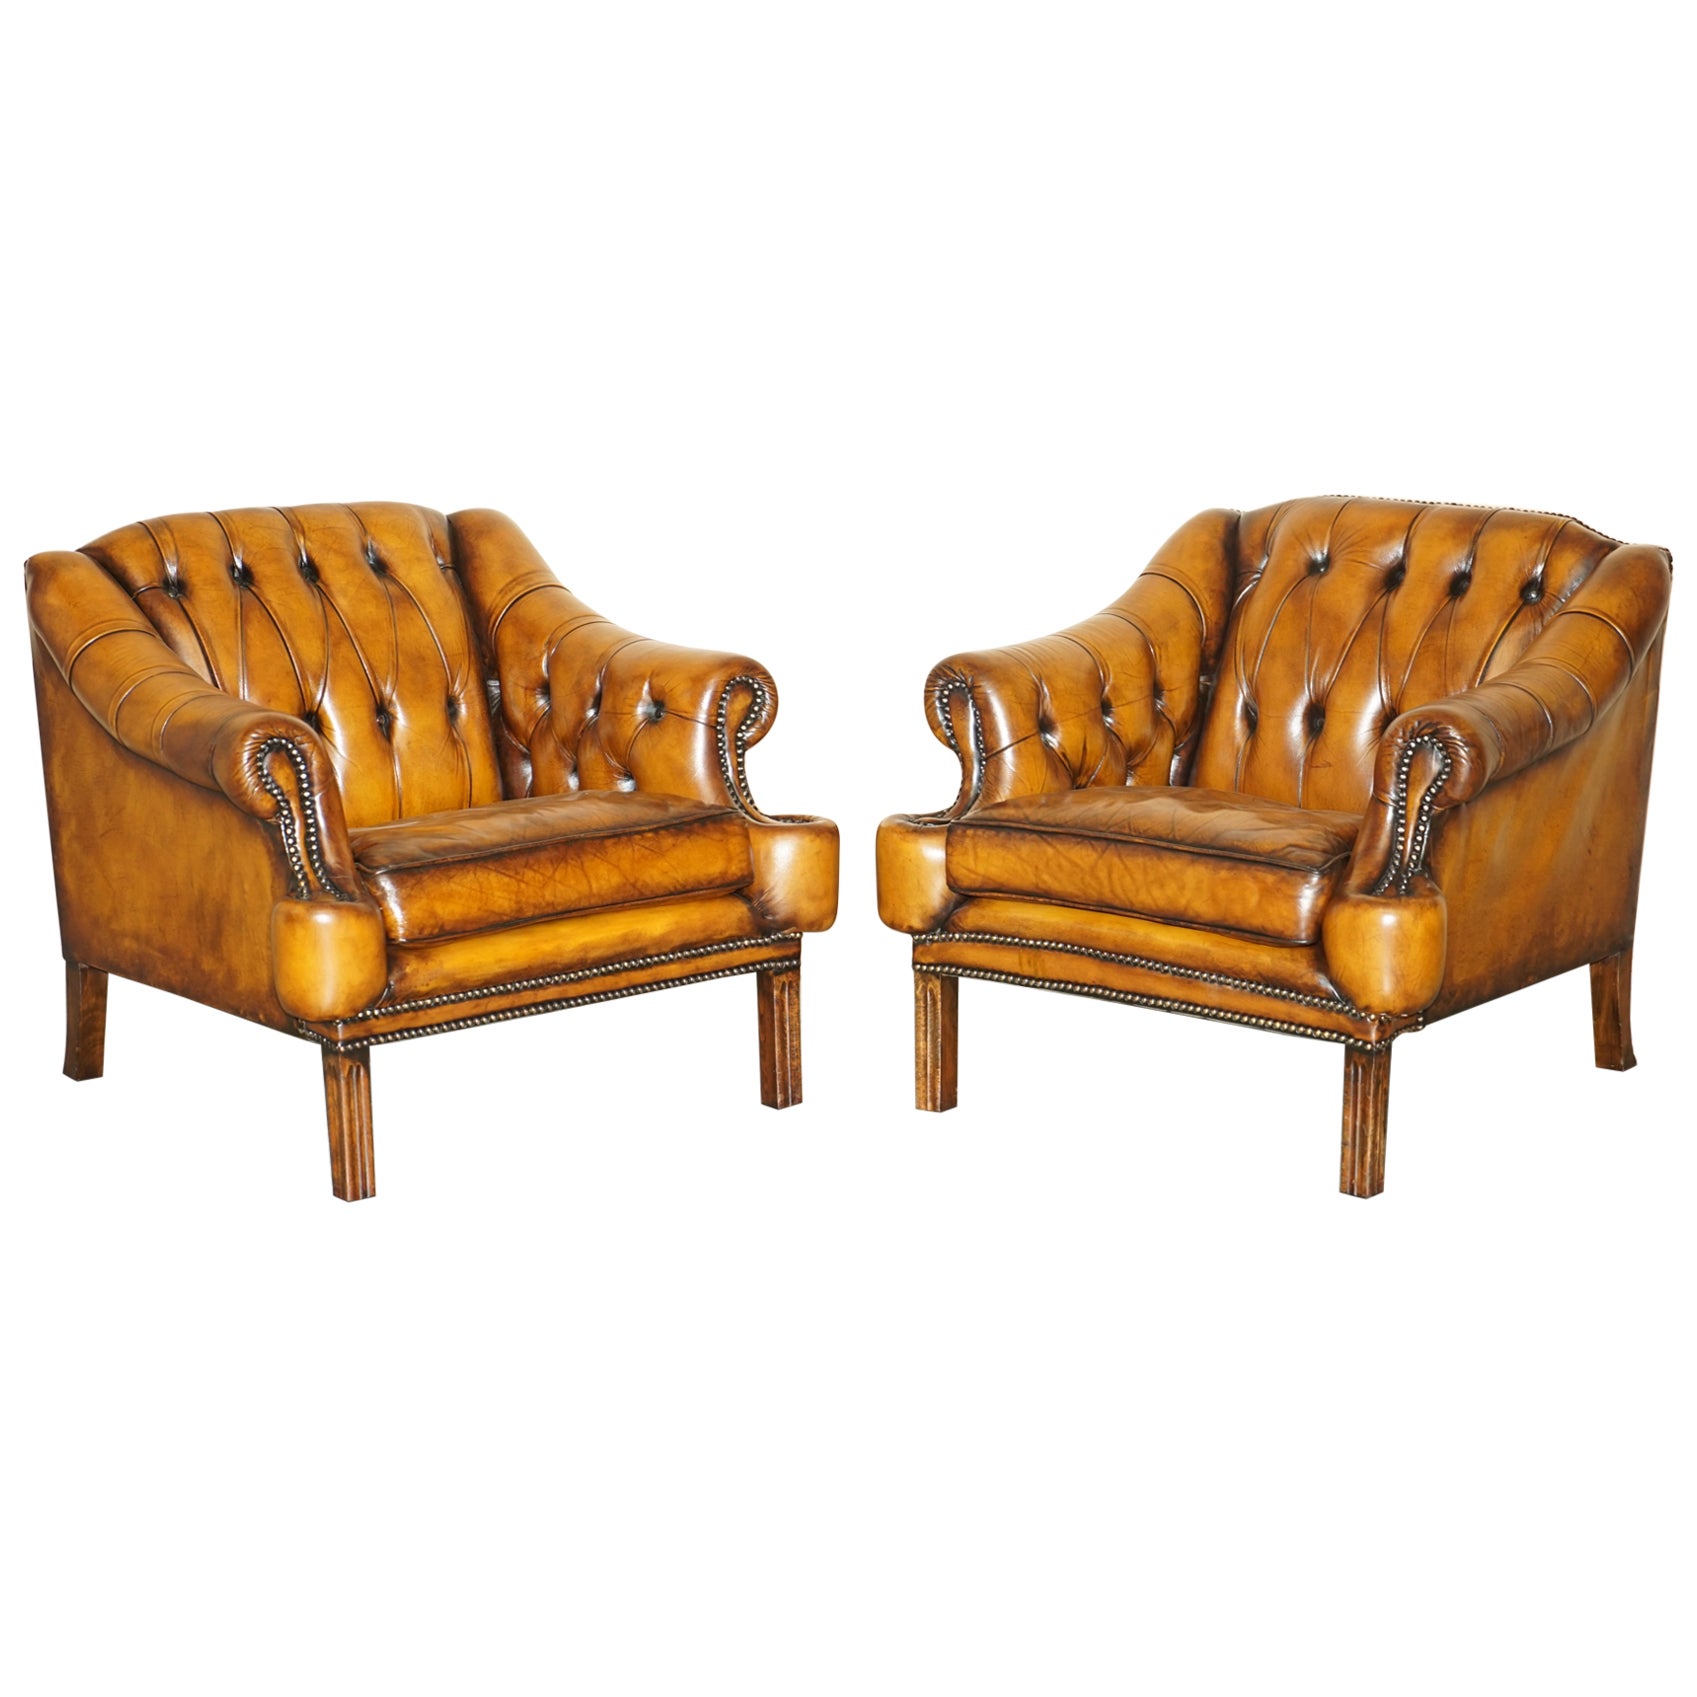 RESTORED PAIR OF ViNTAGE CHESTERFIELD REGENCY STYLE BROWN LEATHER CLUB ARMCHAIRS